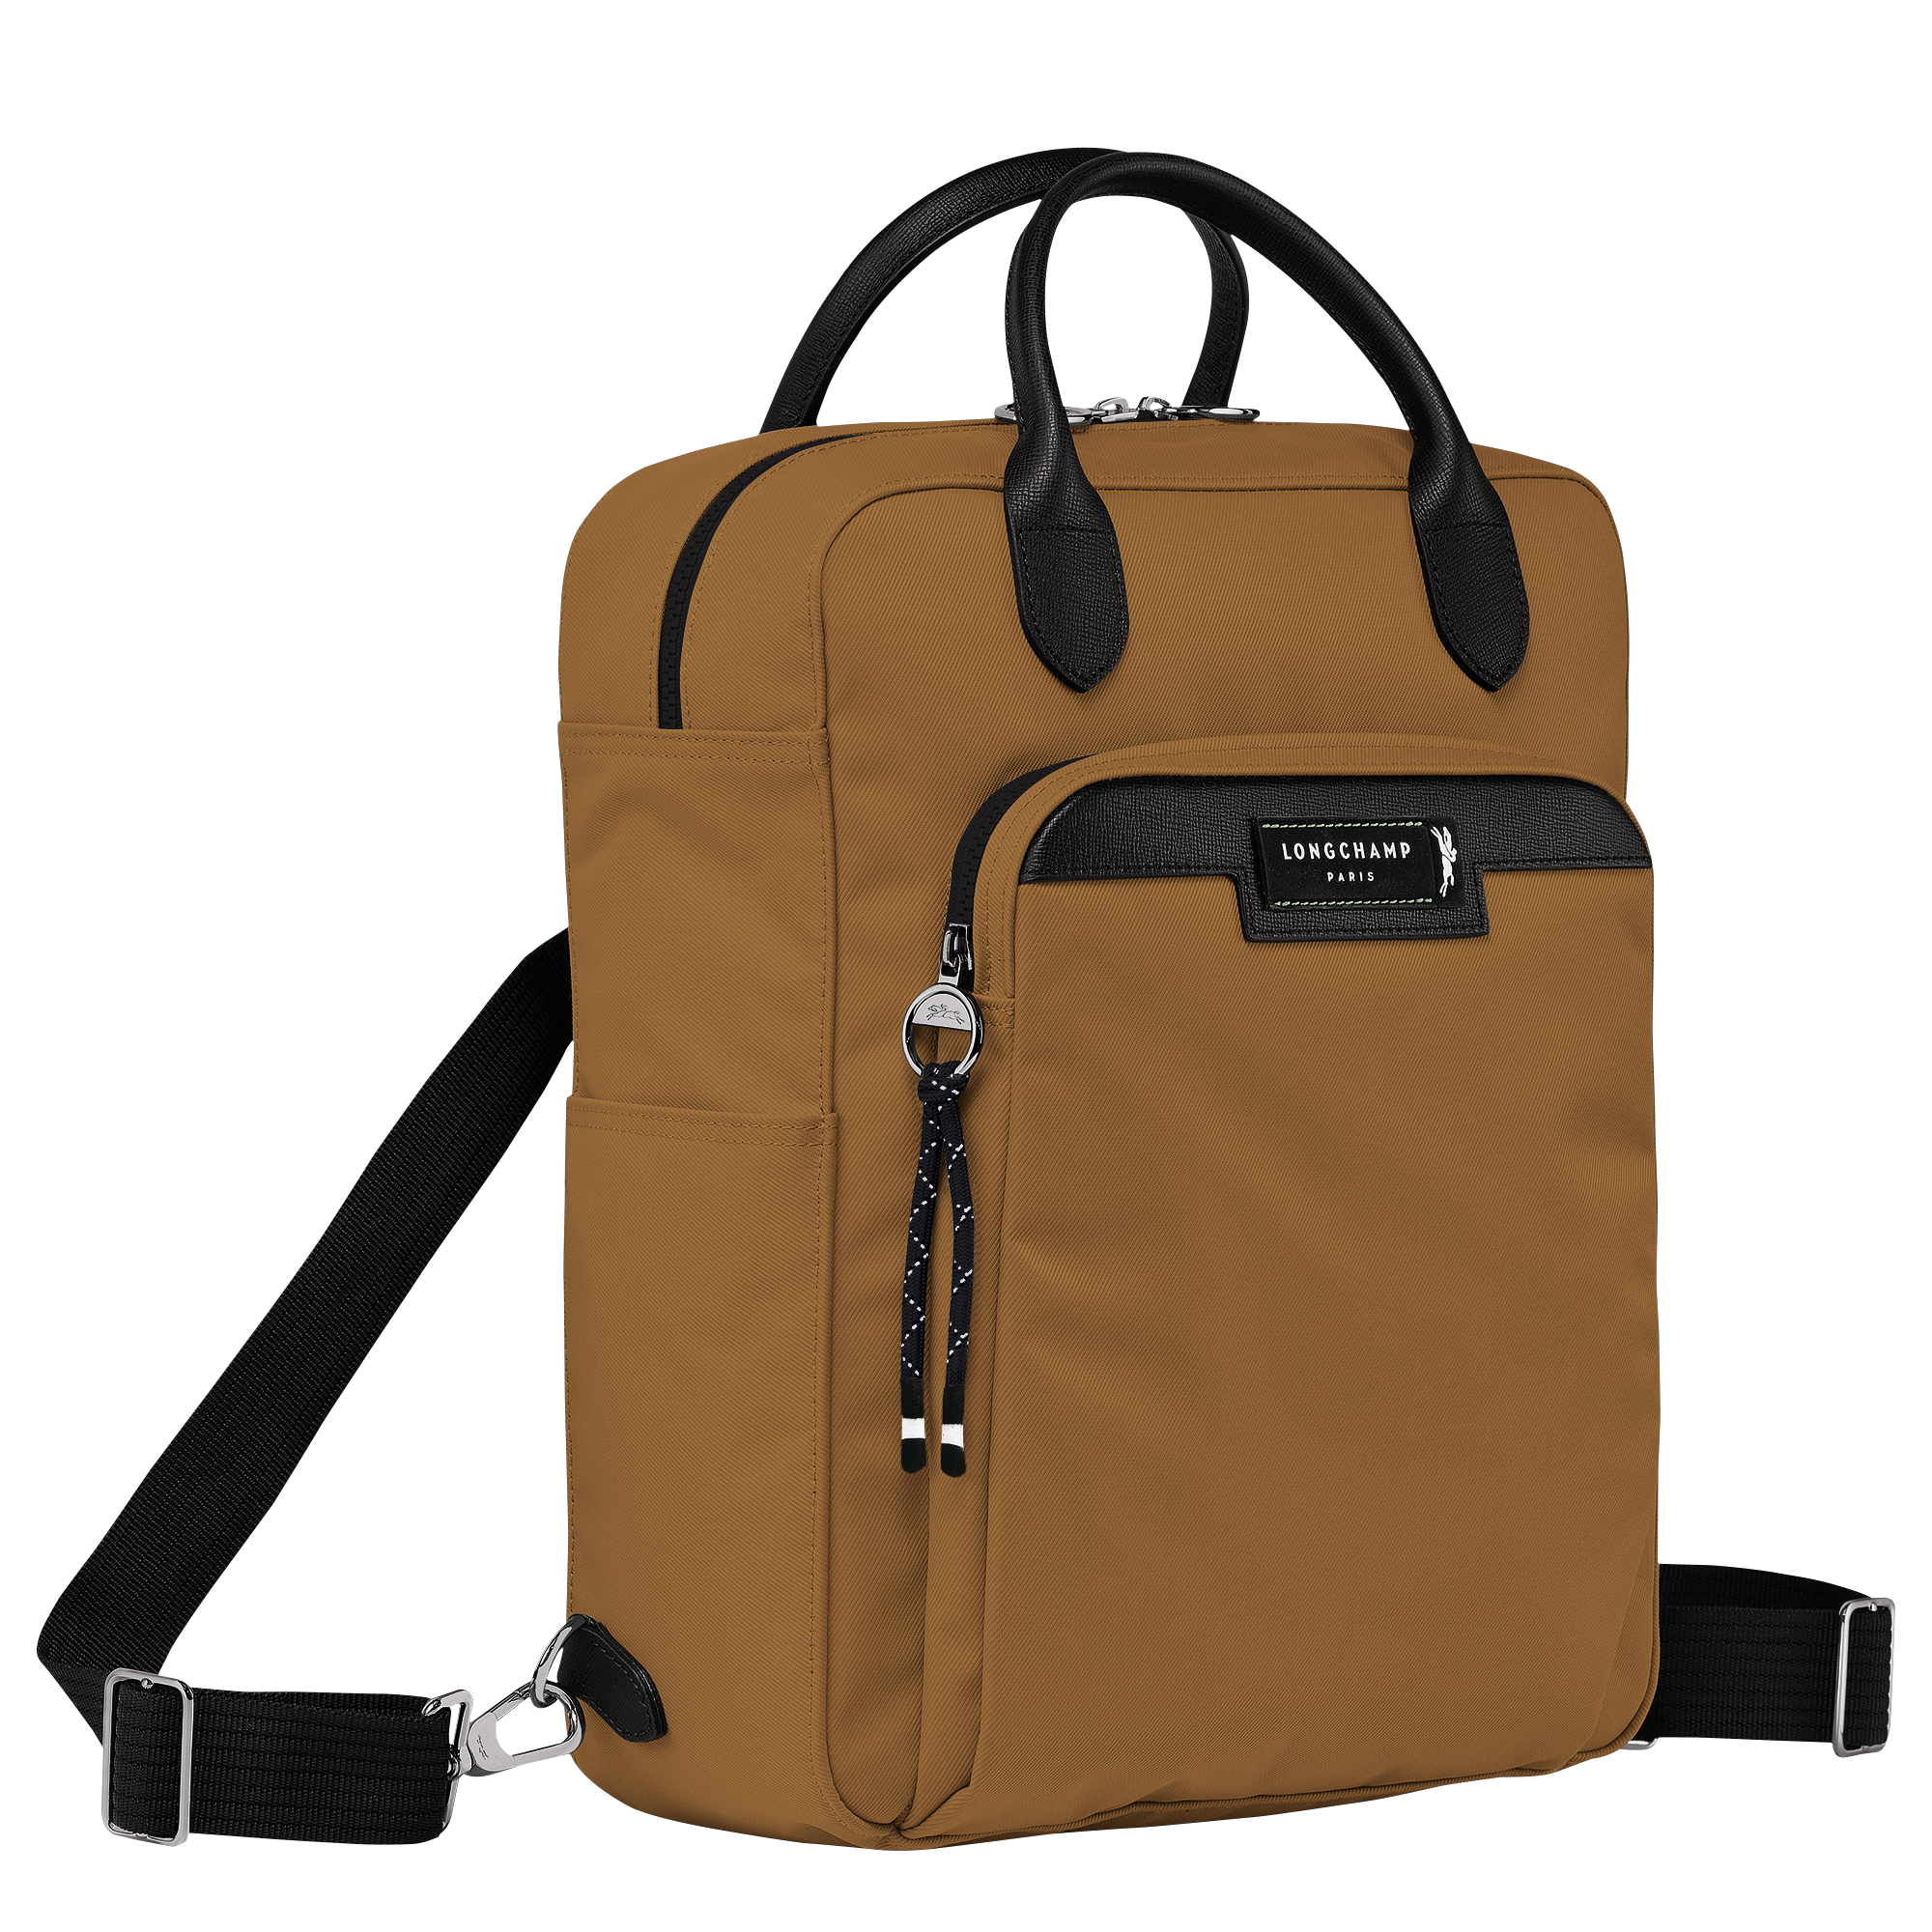 Longchamp Bags - Le Pilage, Backpacks & Suitcases